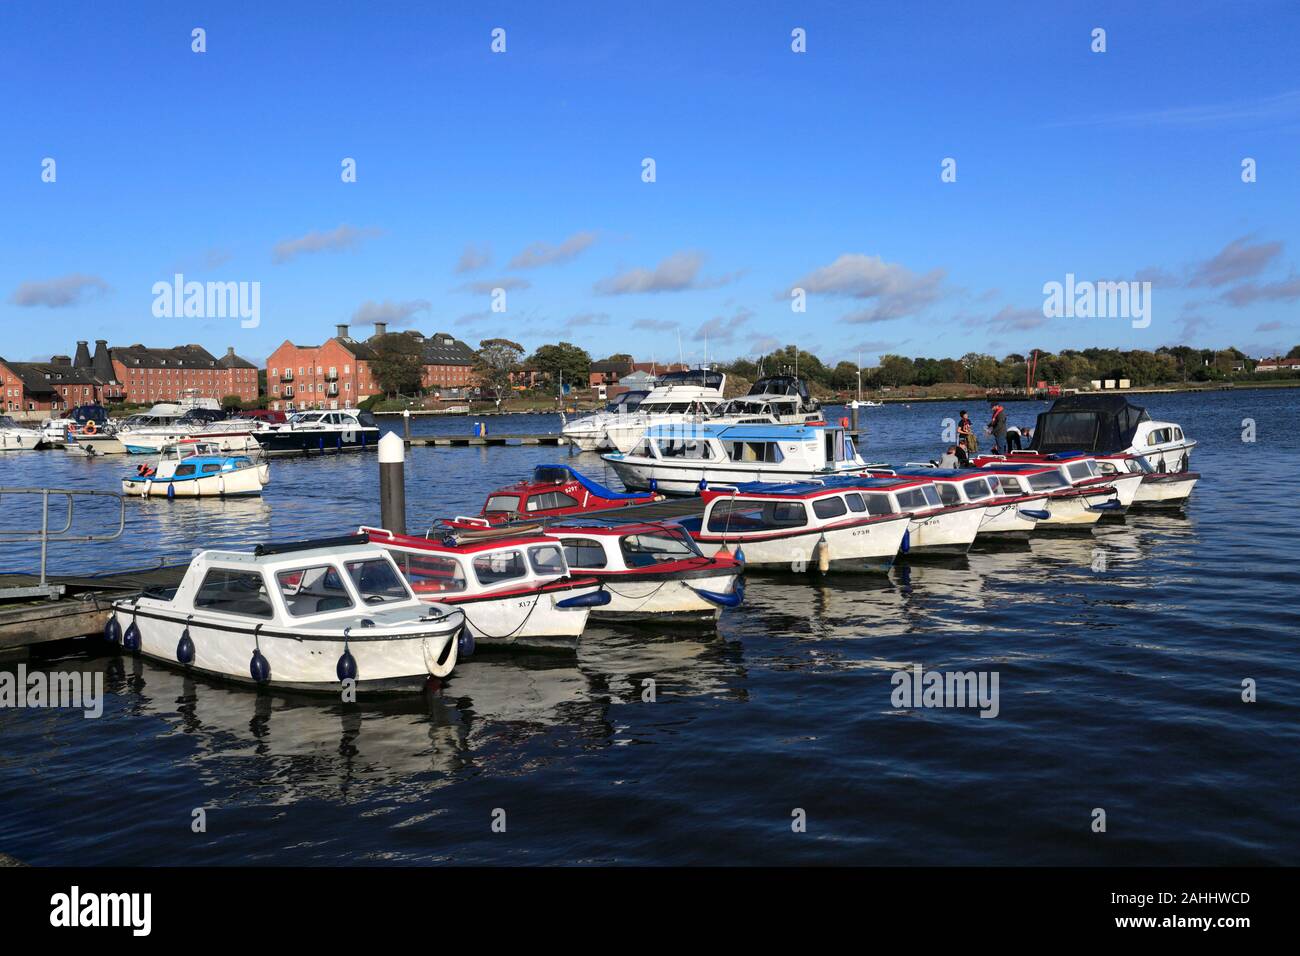 Summer view over Oulton Broad, Lowestoft town, Suffolk county, England Stock Photo